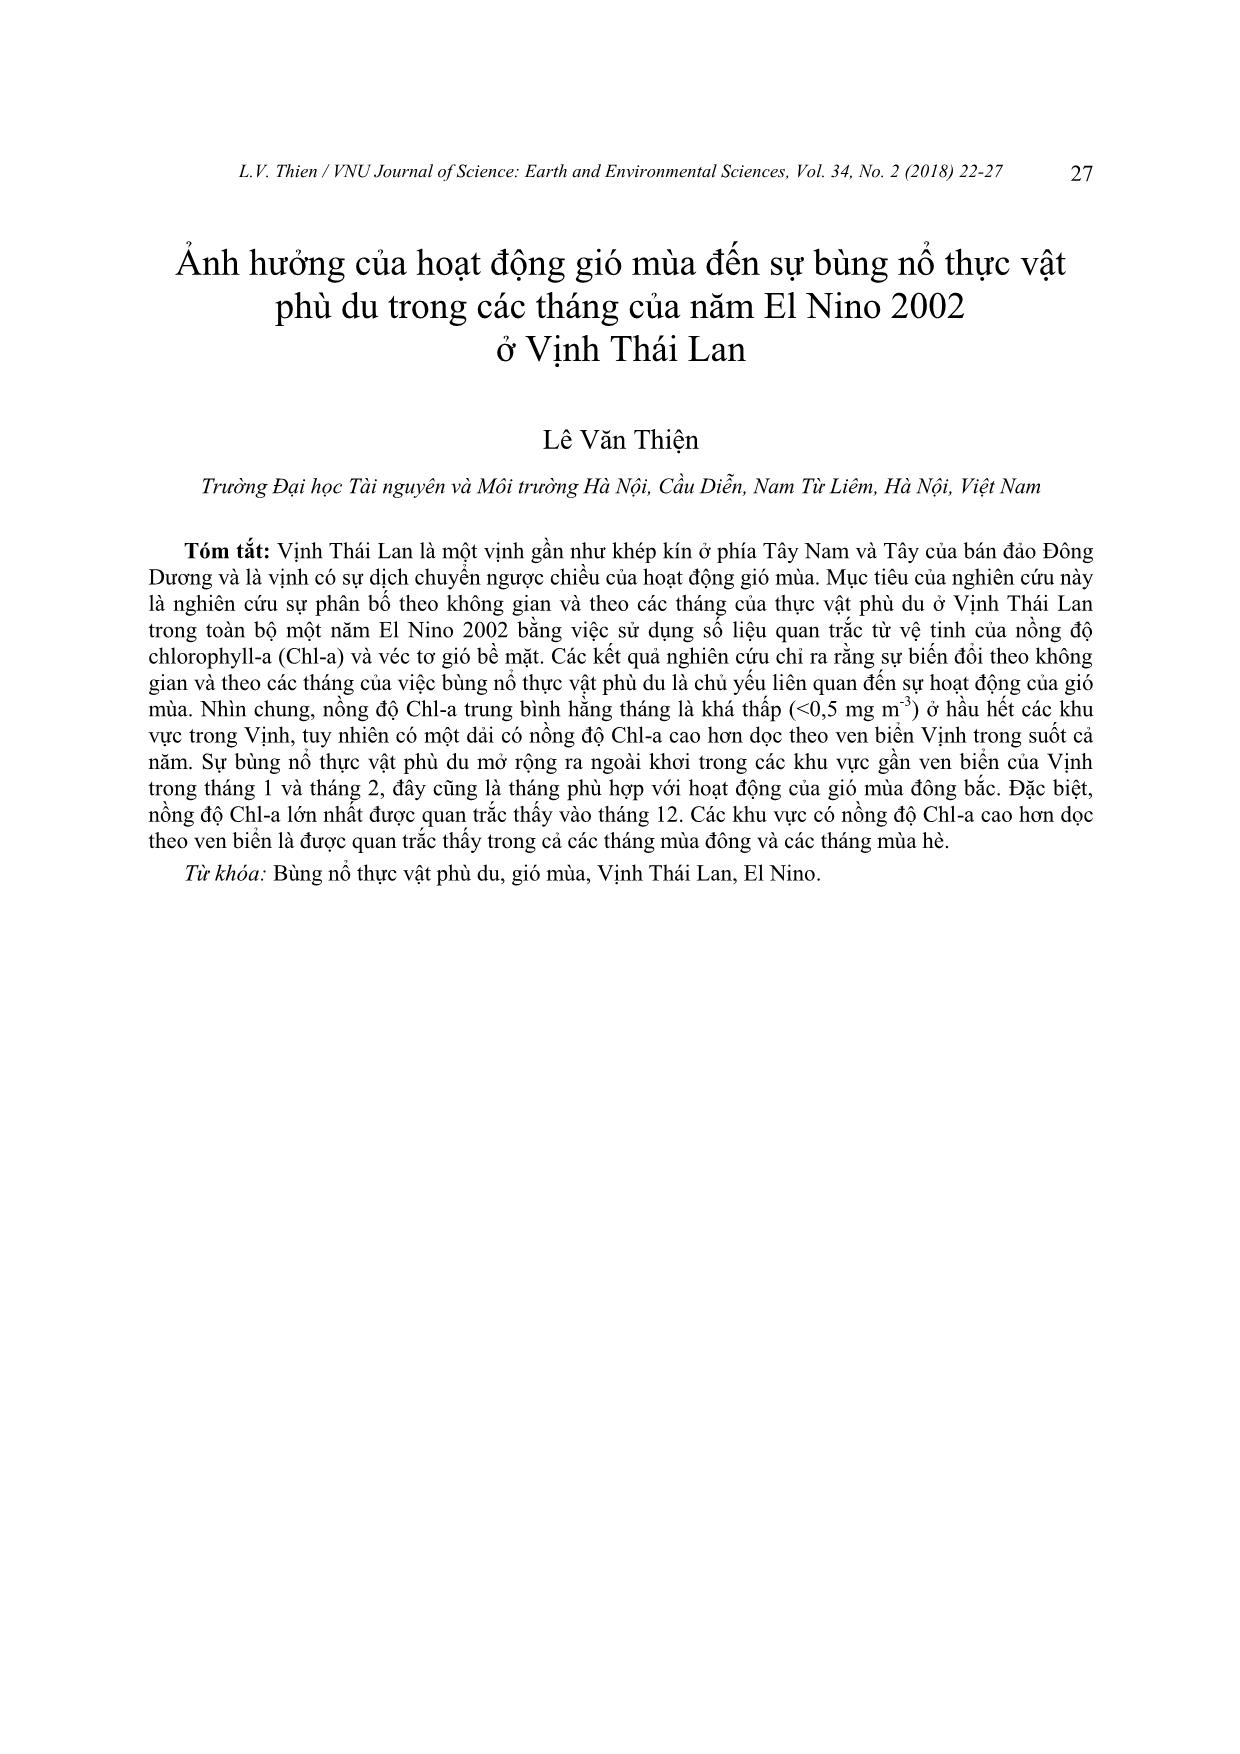 Effects of Monsoon Activity on Monthly Phytoplankton Blooms in the Gulf of Thai Land in El Nino Year 2002 trang 6